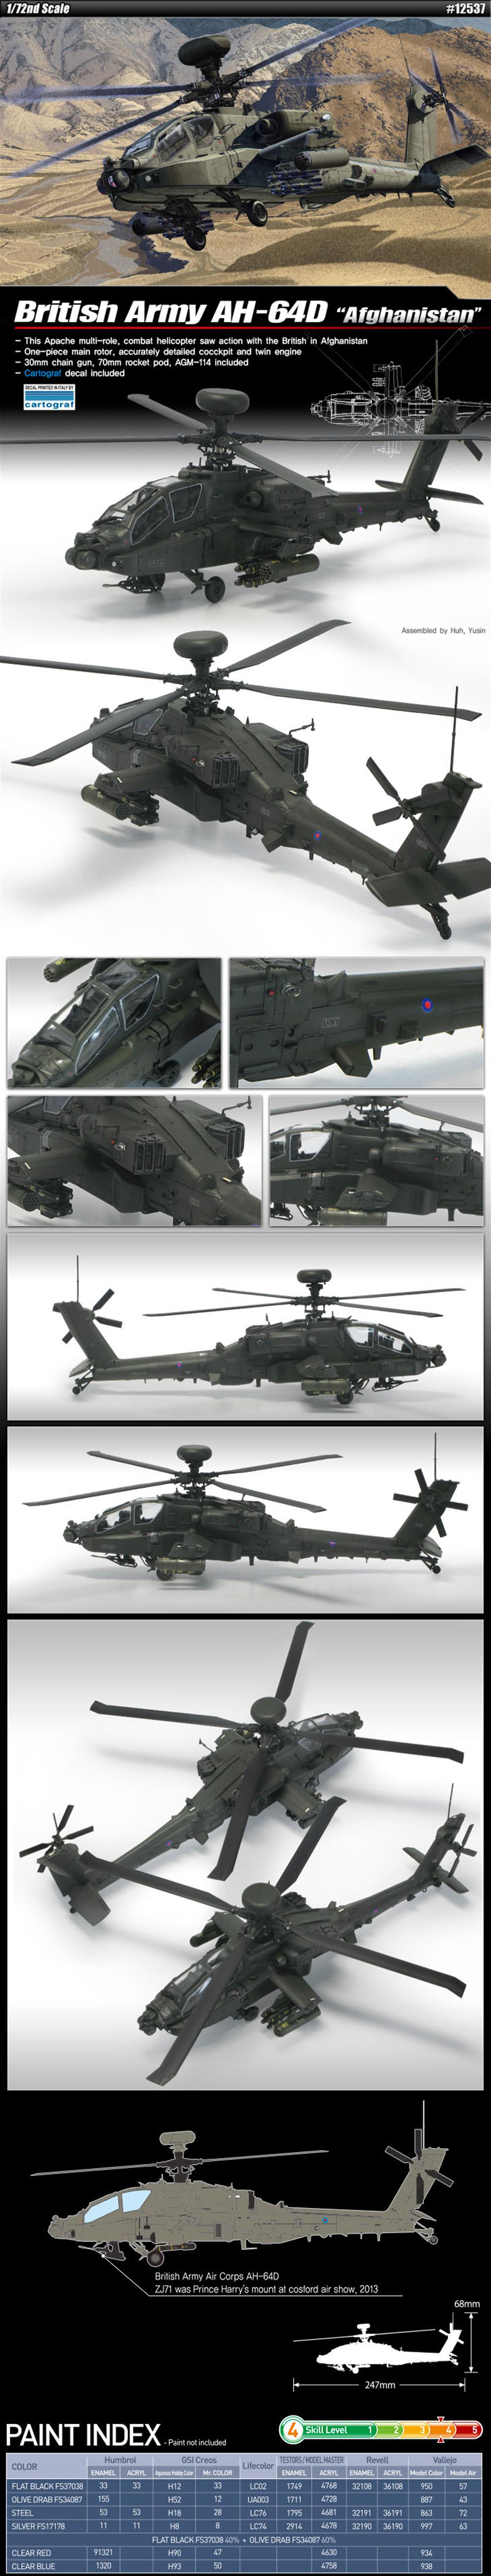 Academy 1/72 12537 AH-64D British Army Afghanistan Helicopter Kit